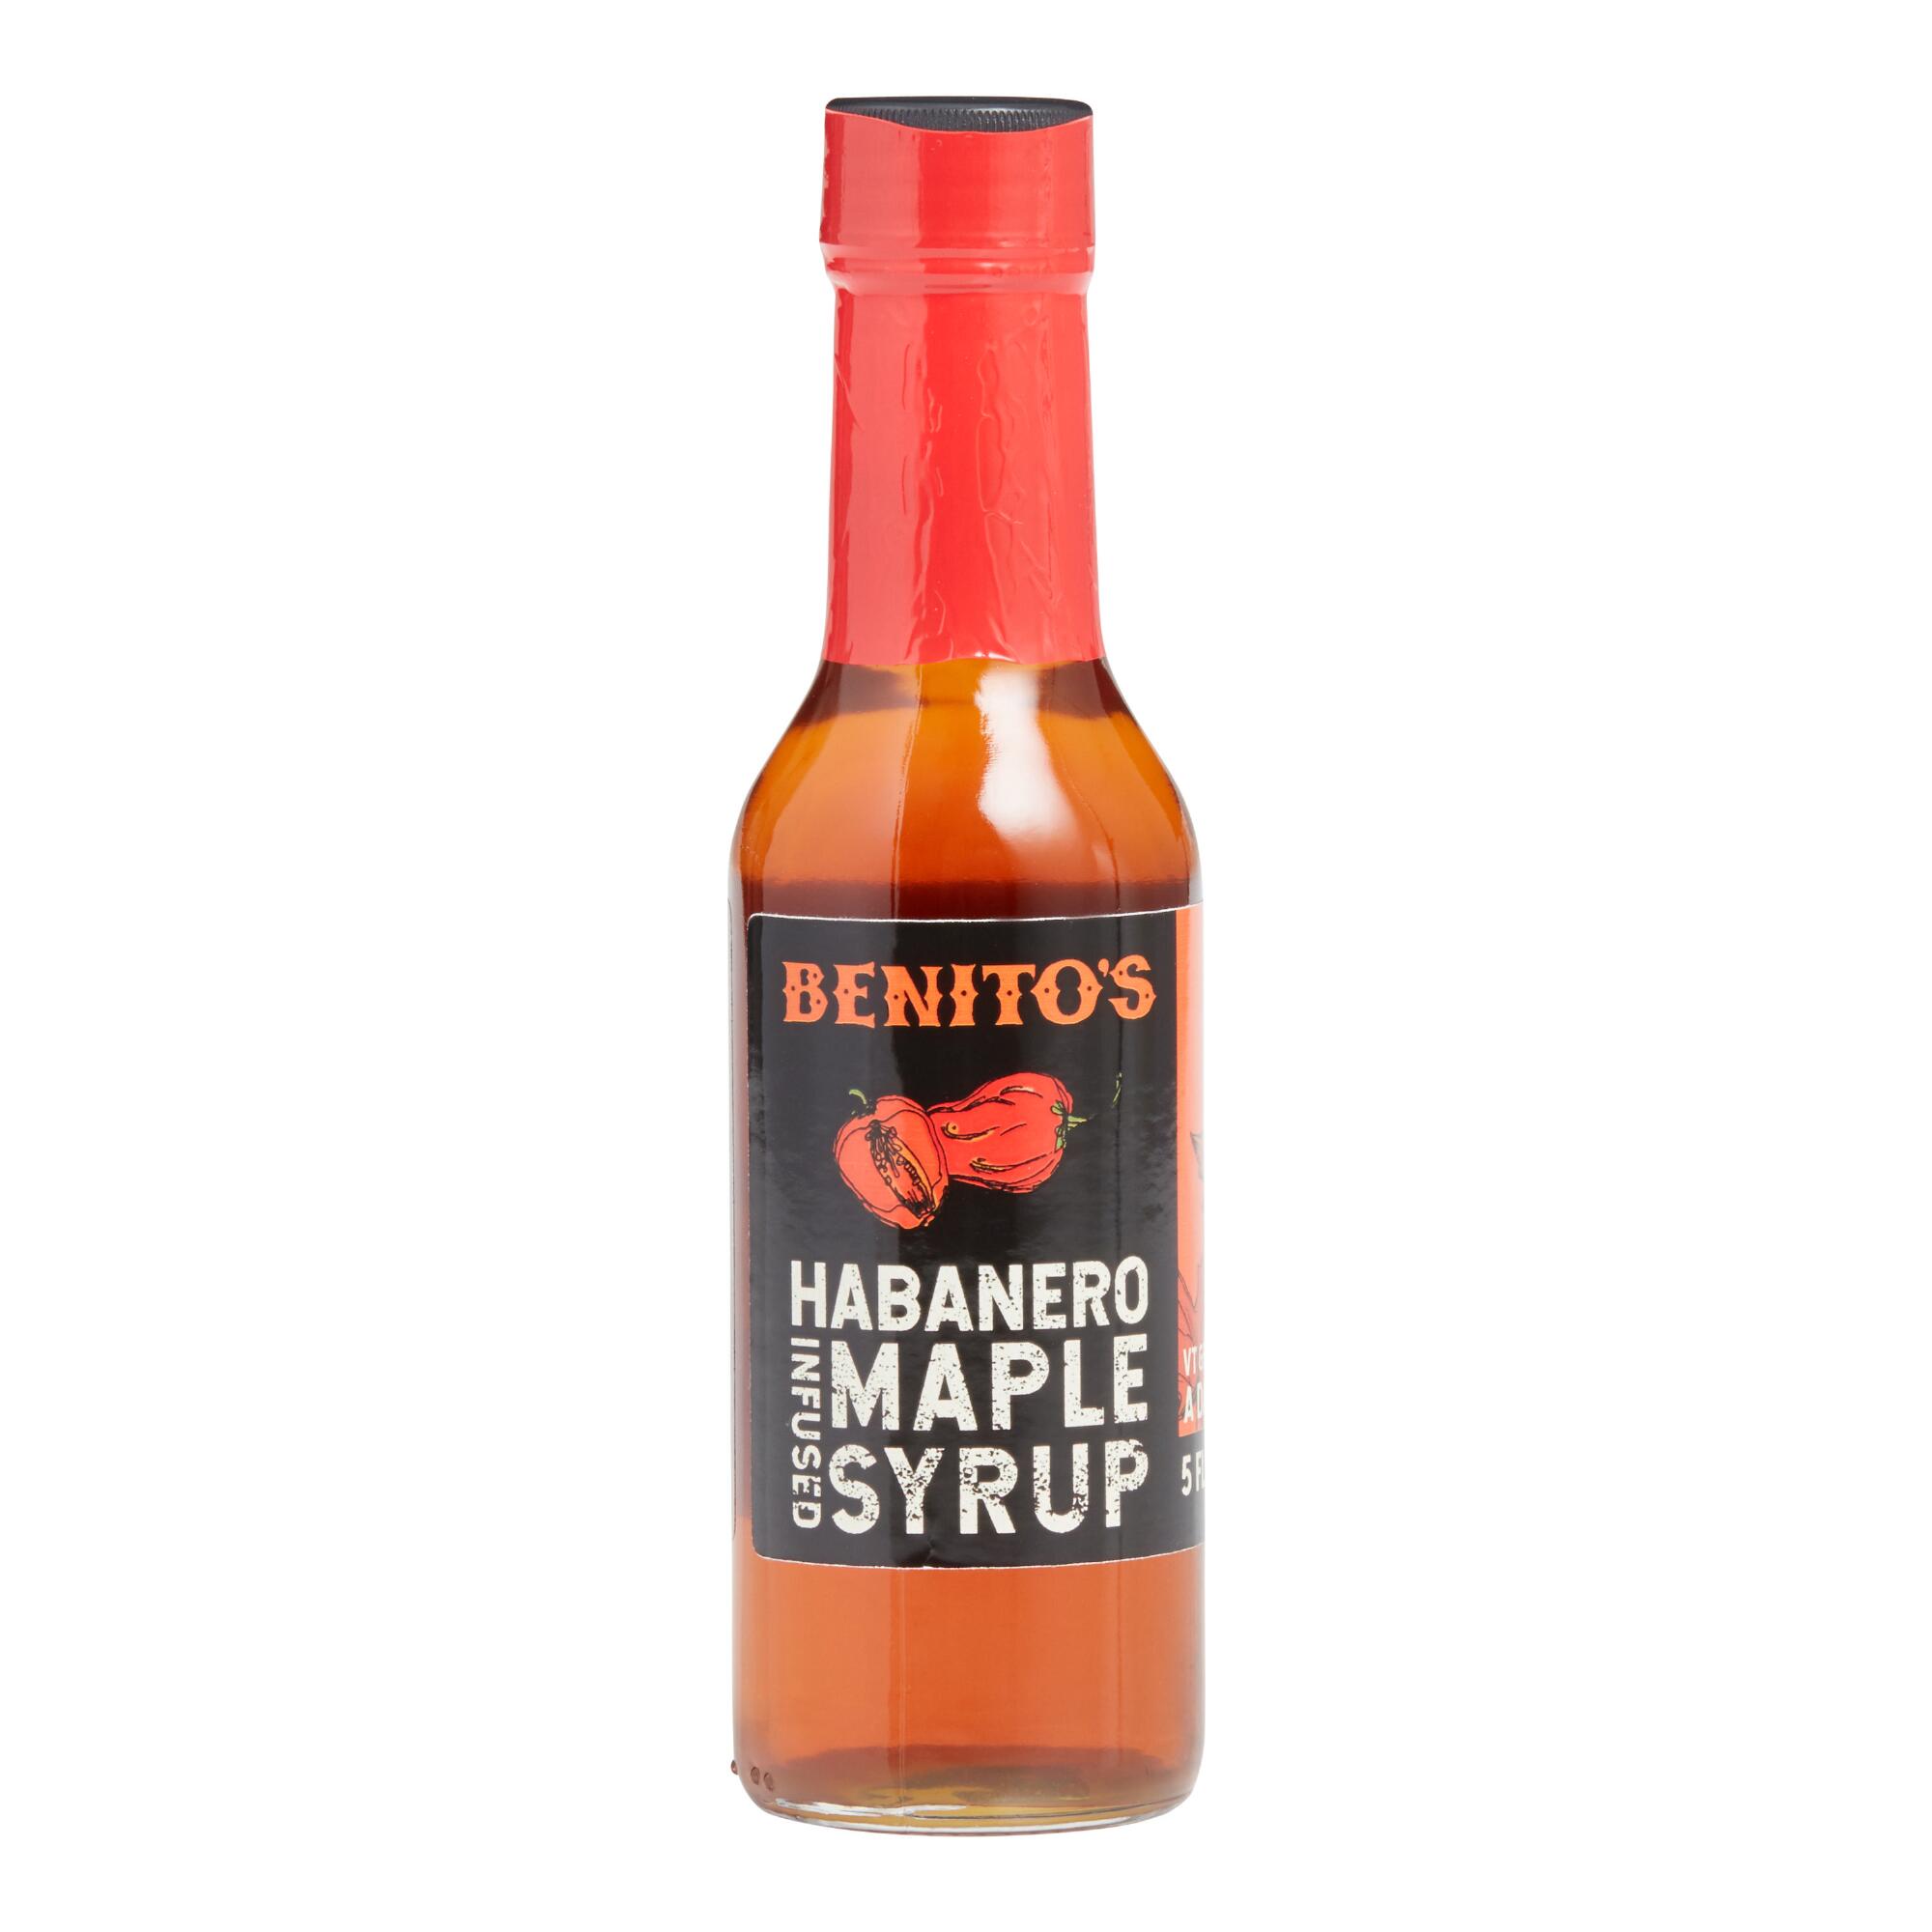 Benito's Habanero Infused Maple Syrup by World Market